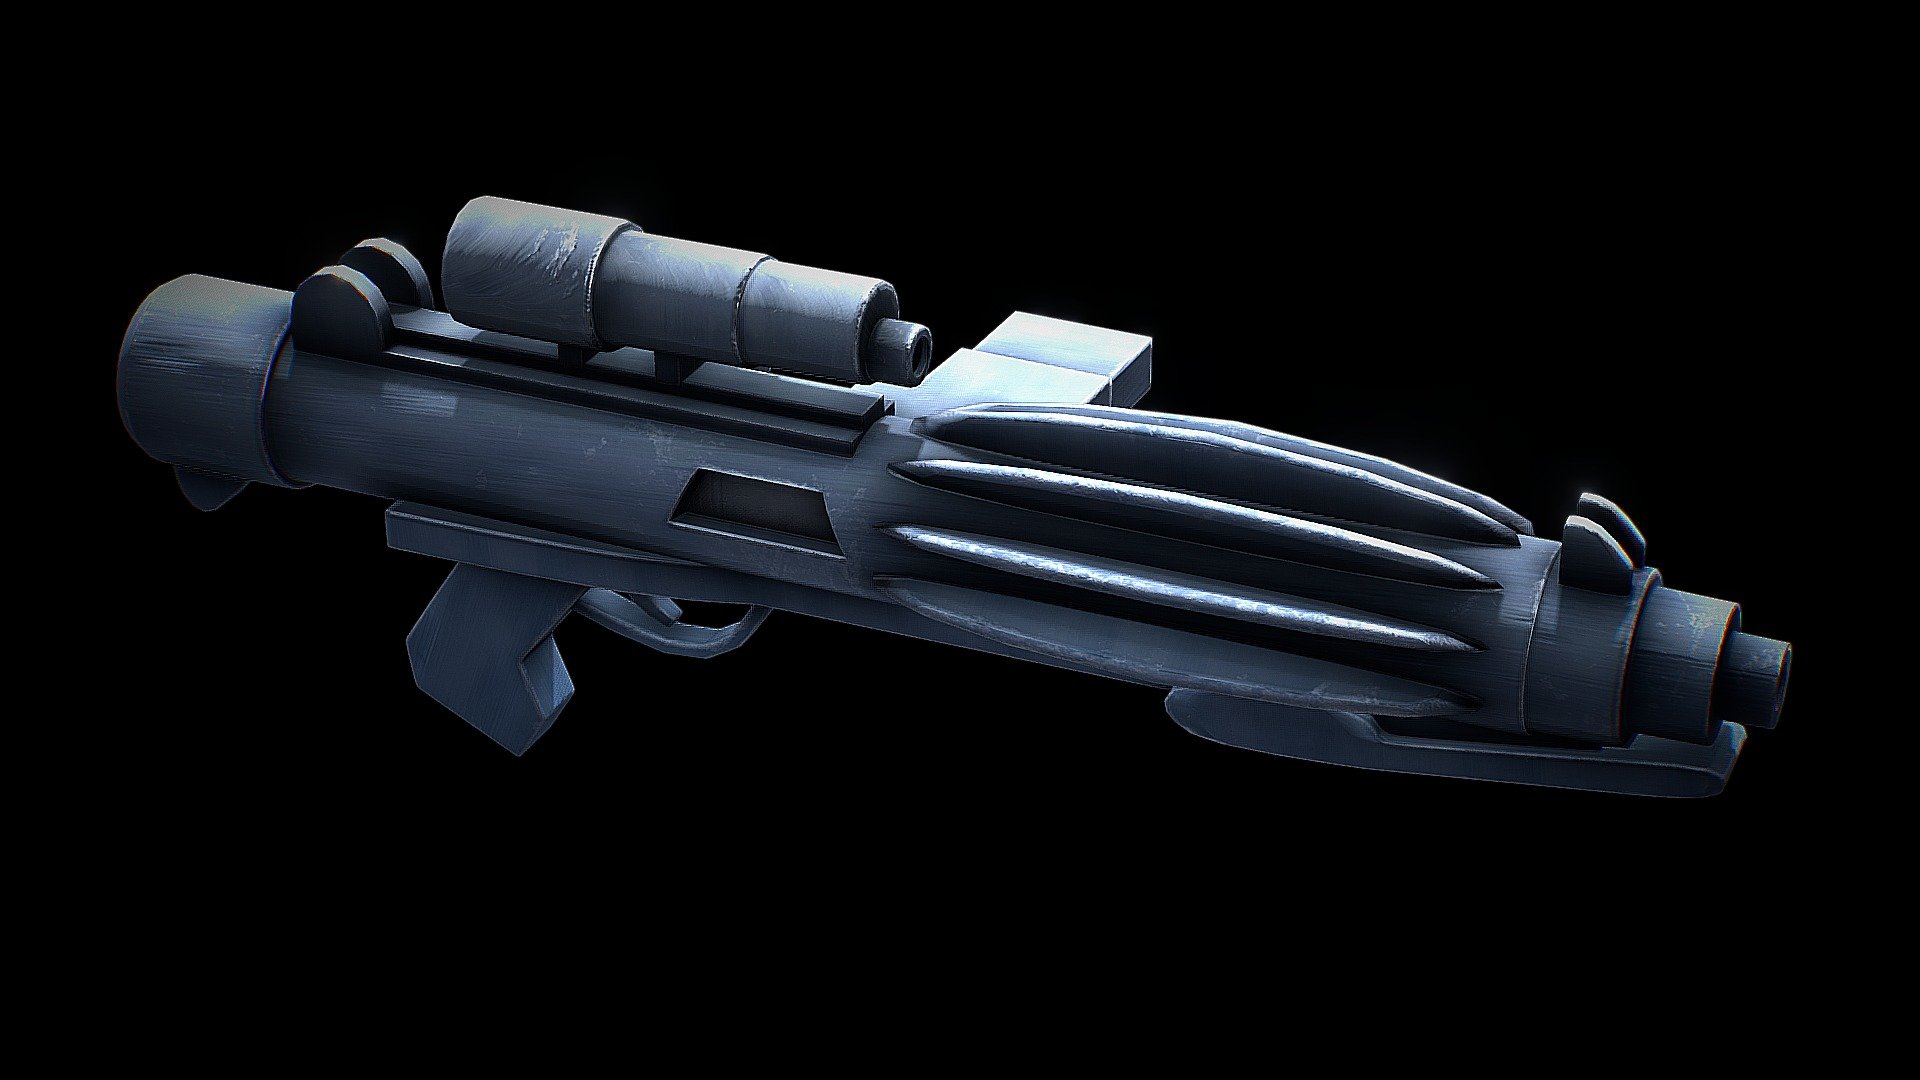 The primary blaster rifle used by Imperial Stormtroopers of the Galactic Empire.

Textures are semi-stylized 3d model